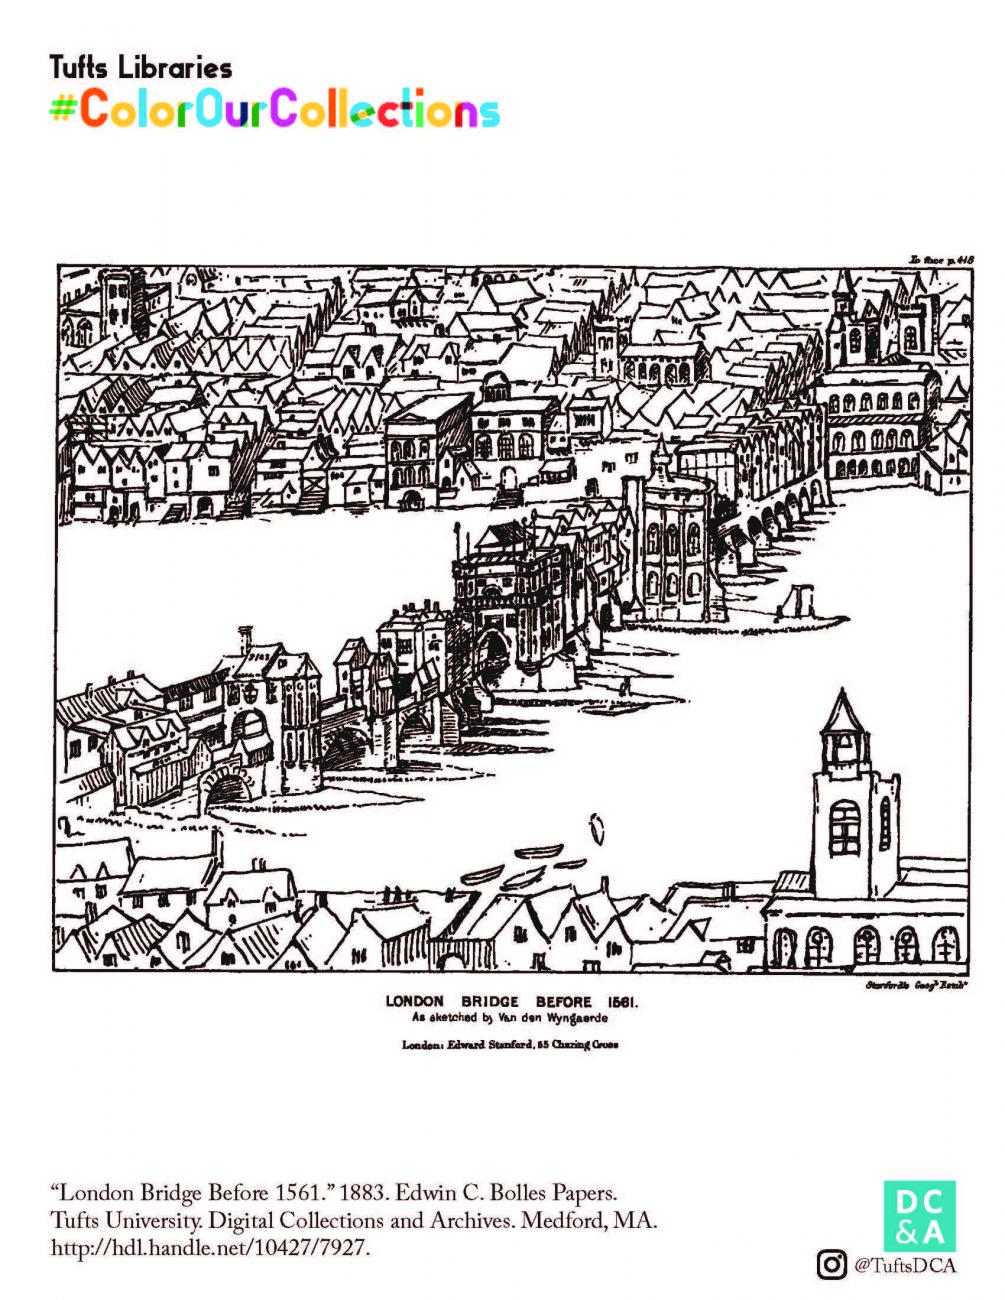 Page from the coloring book with a black and white illustration of London